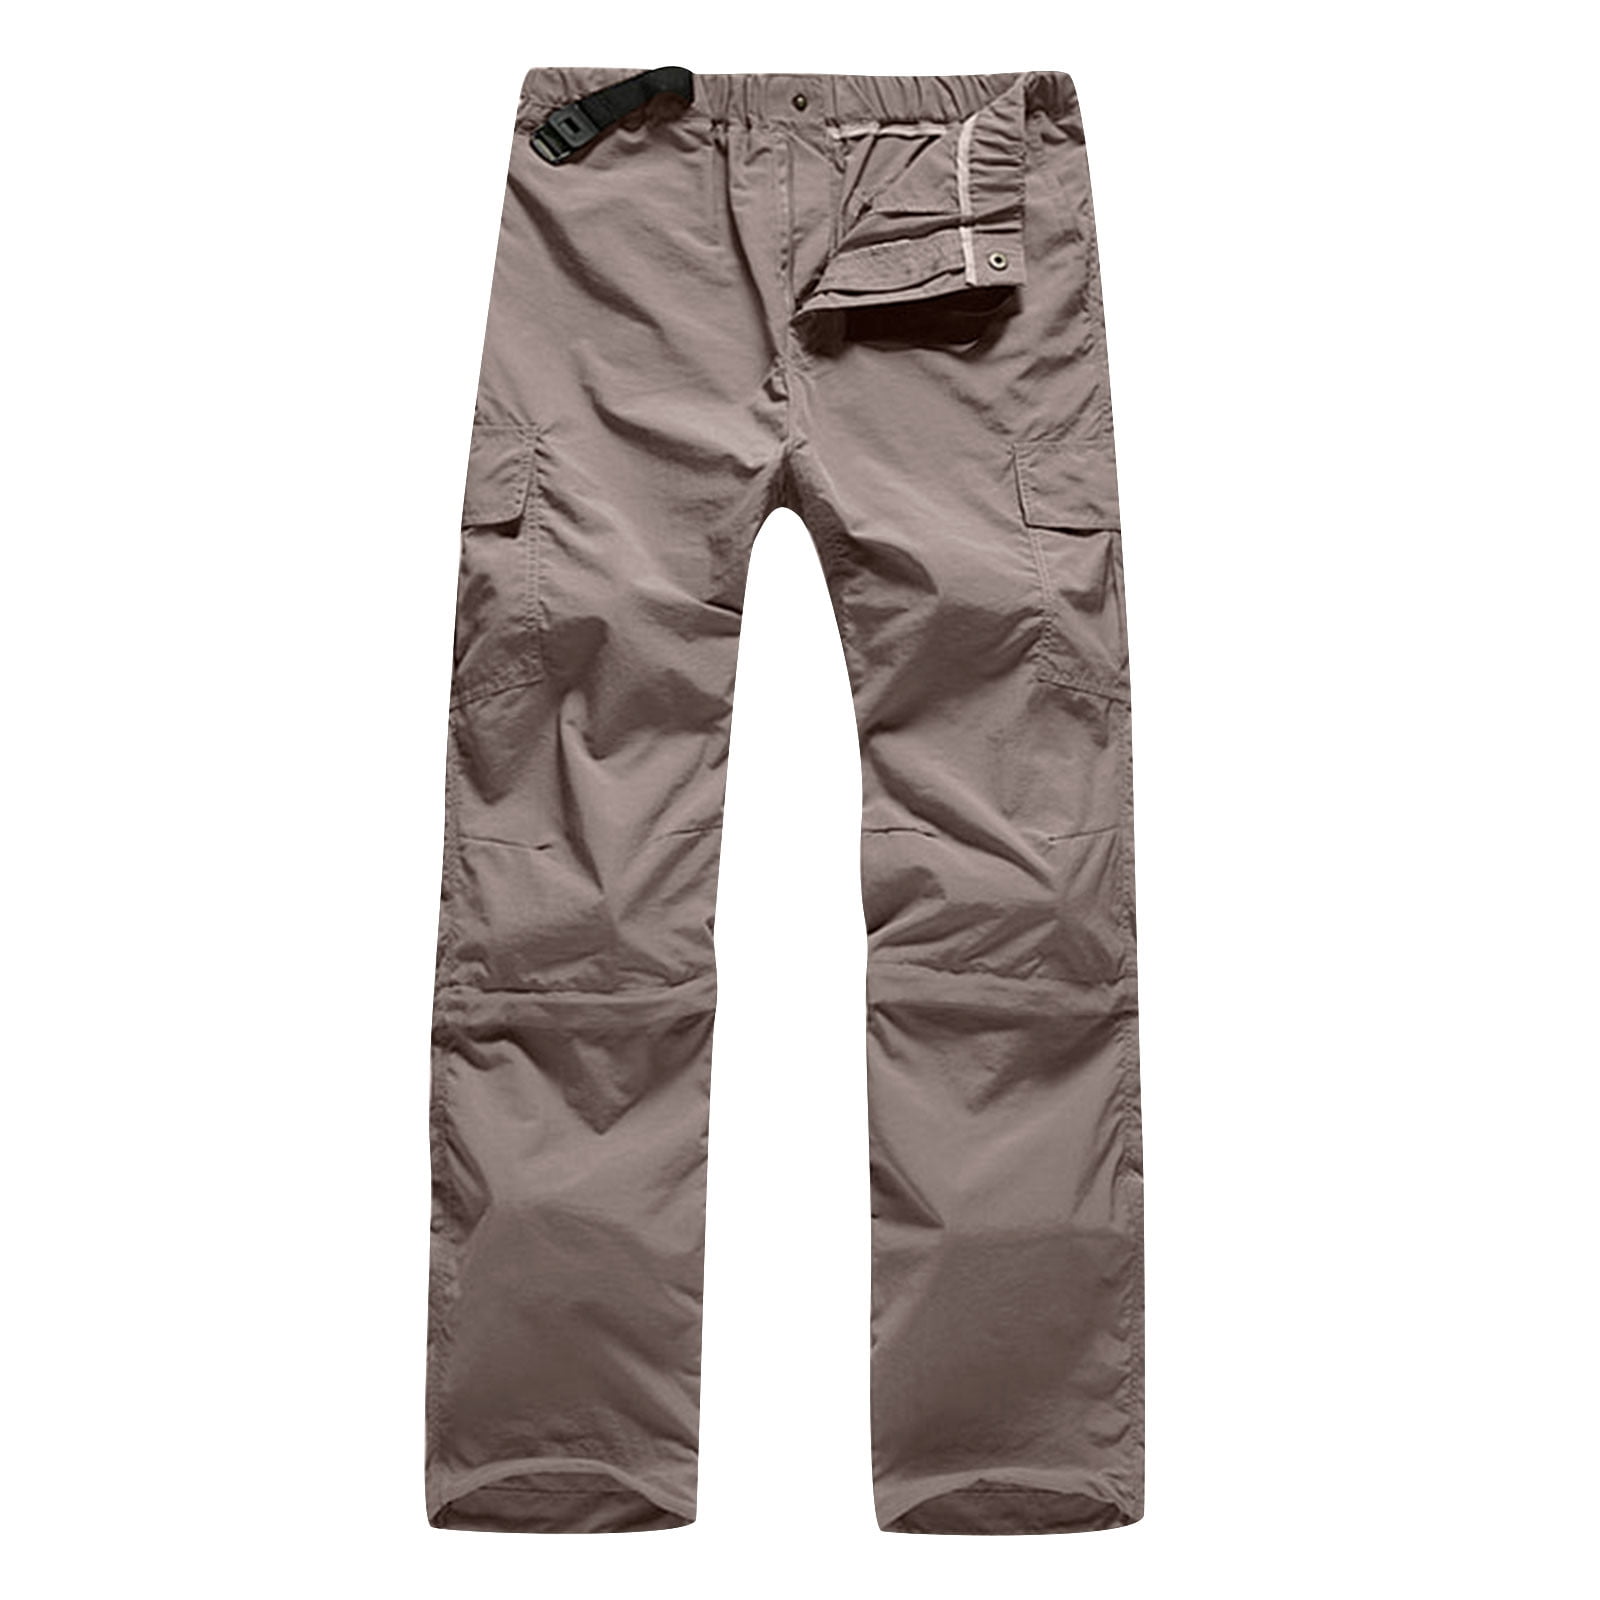 fartey Men's Cargo Hiking Pants Quick Dry Lightweight Breathable ...